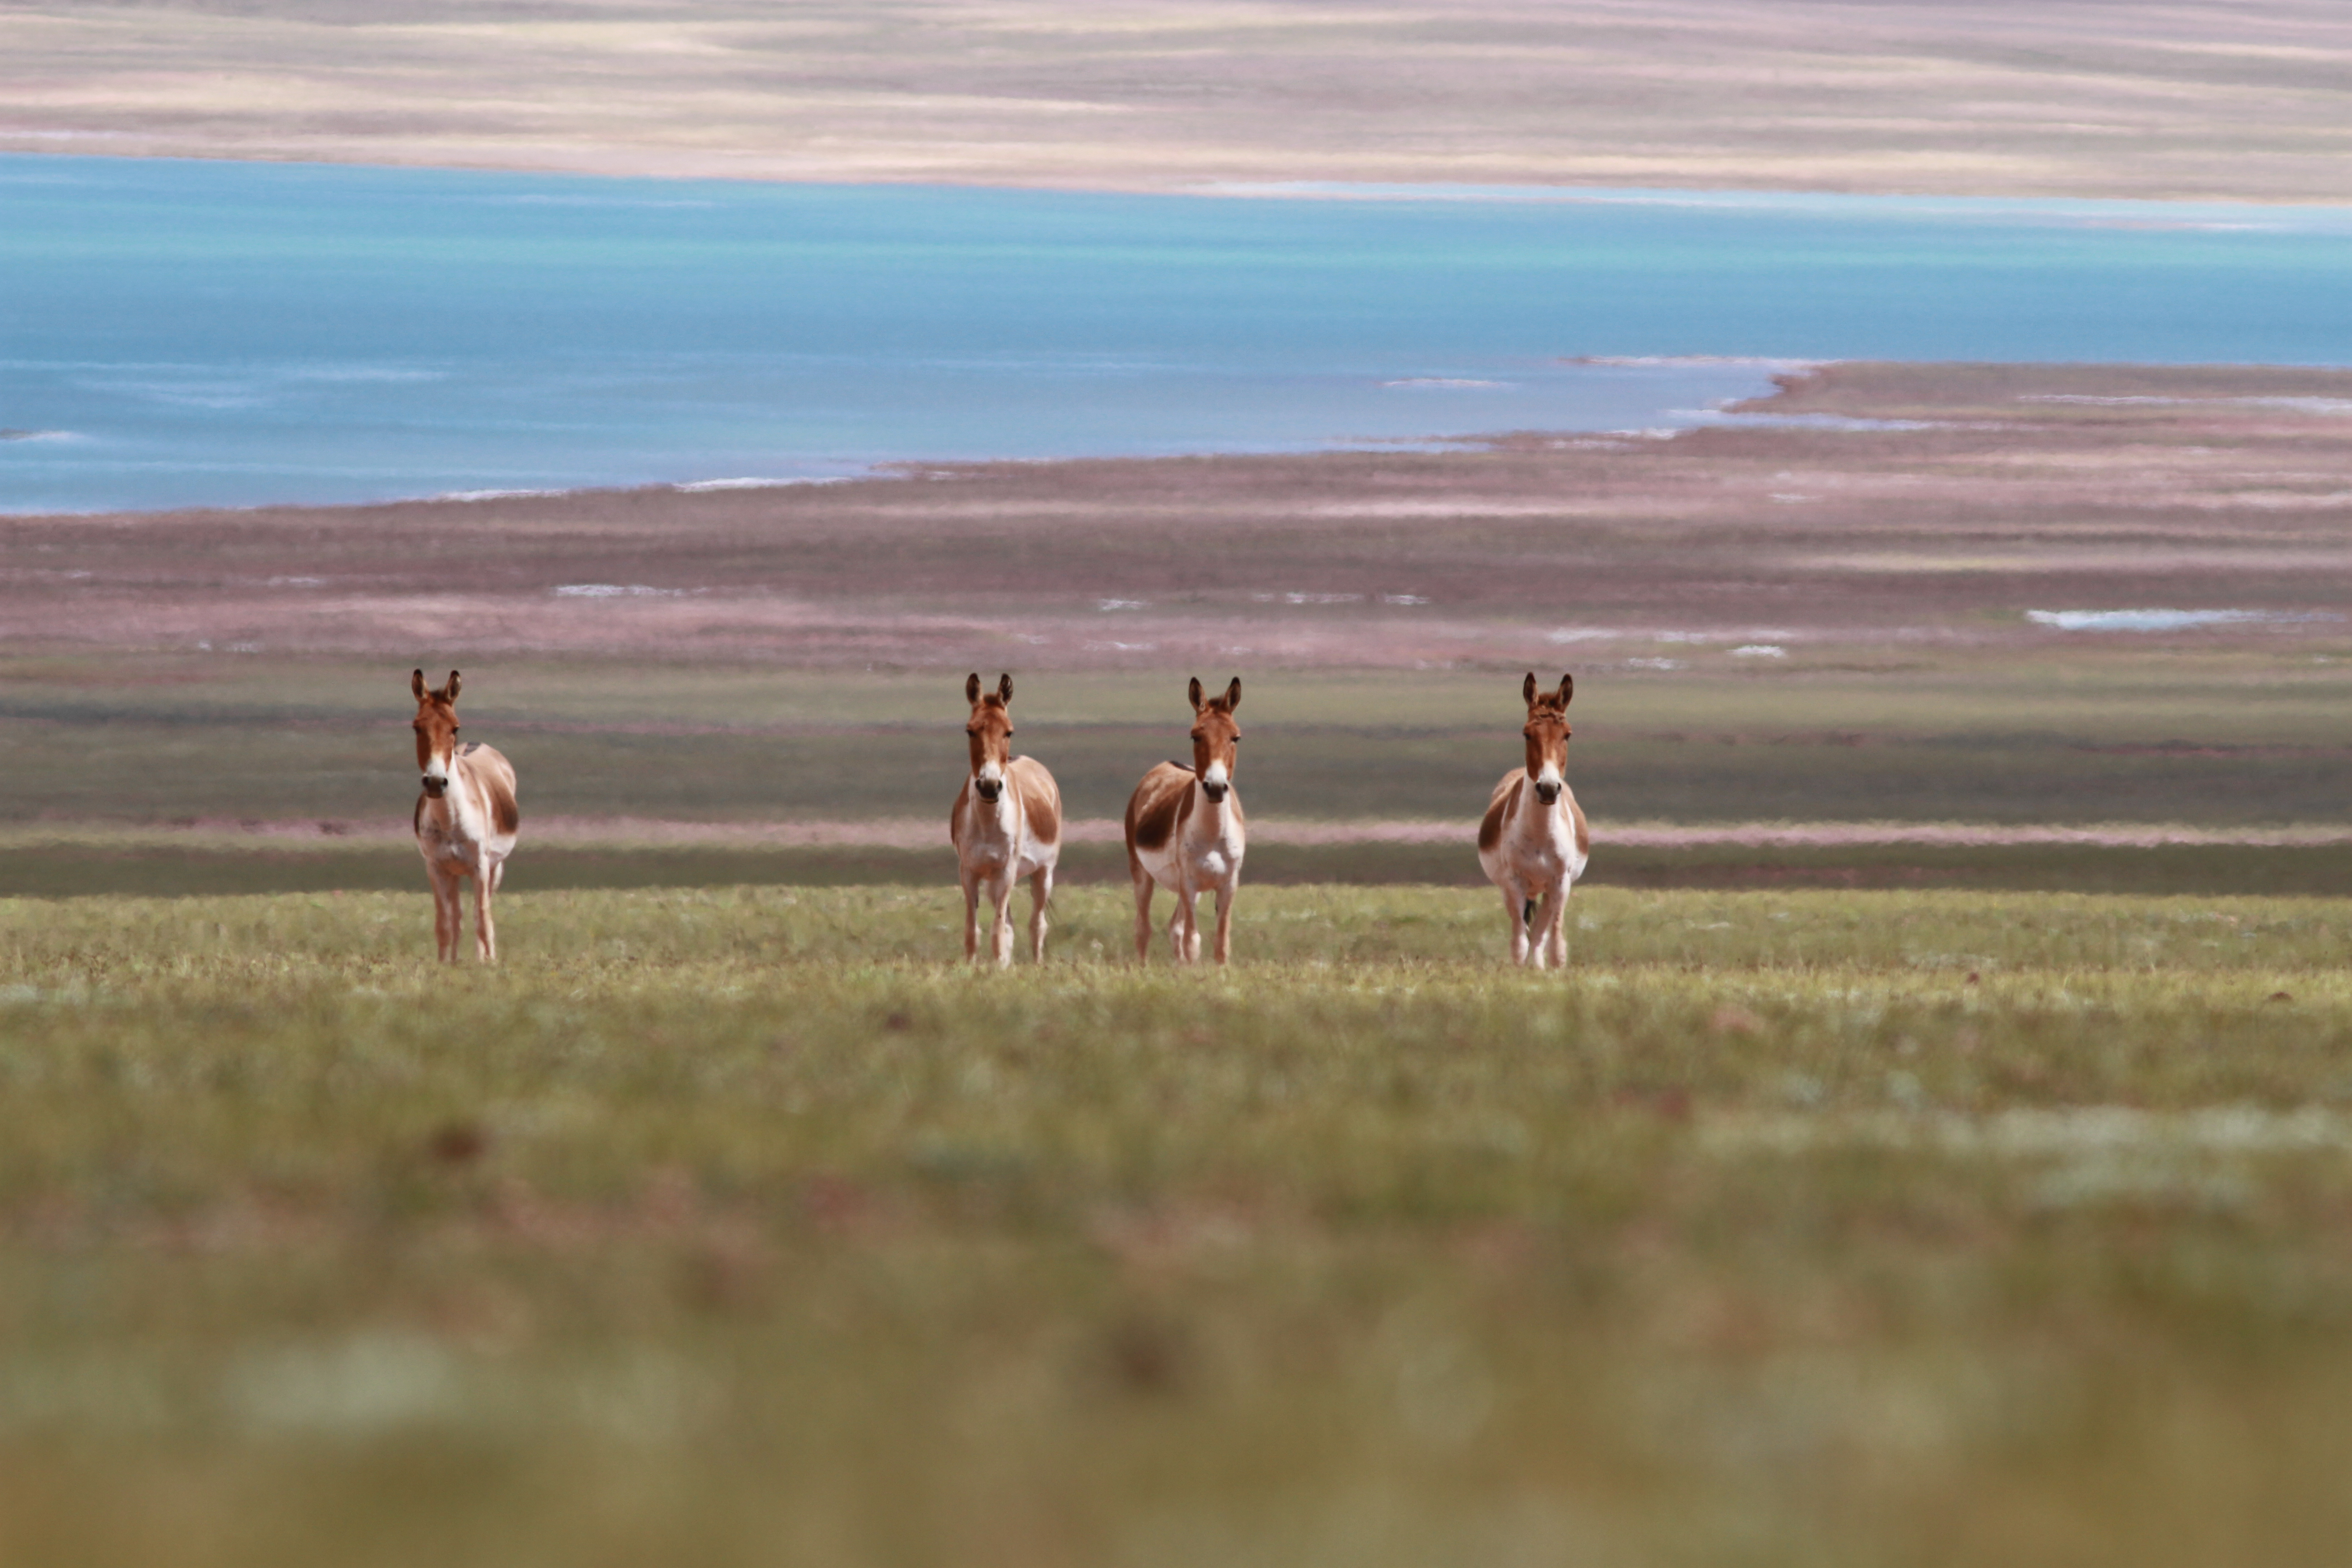 Tibetan Wildass (Kiang) in the Changtang stronghold, Tibet. Courtesy of WCS.